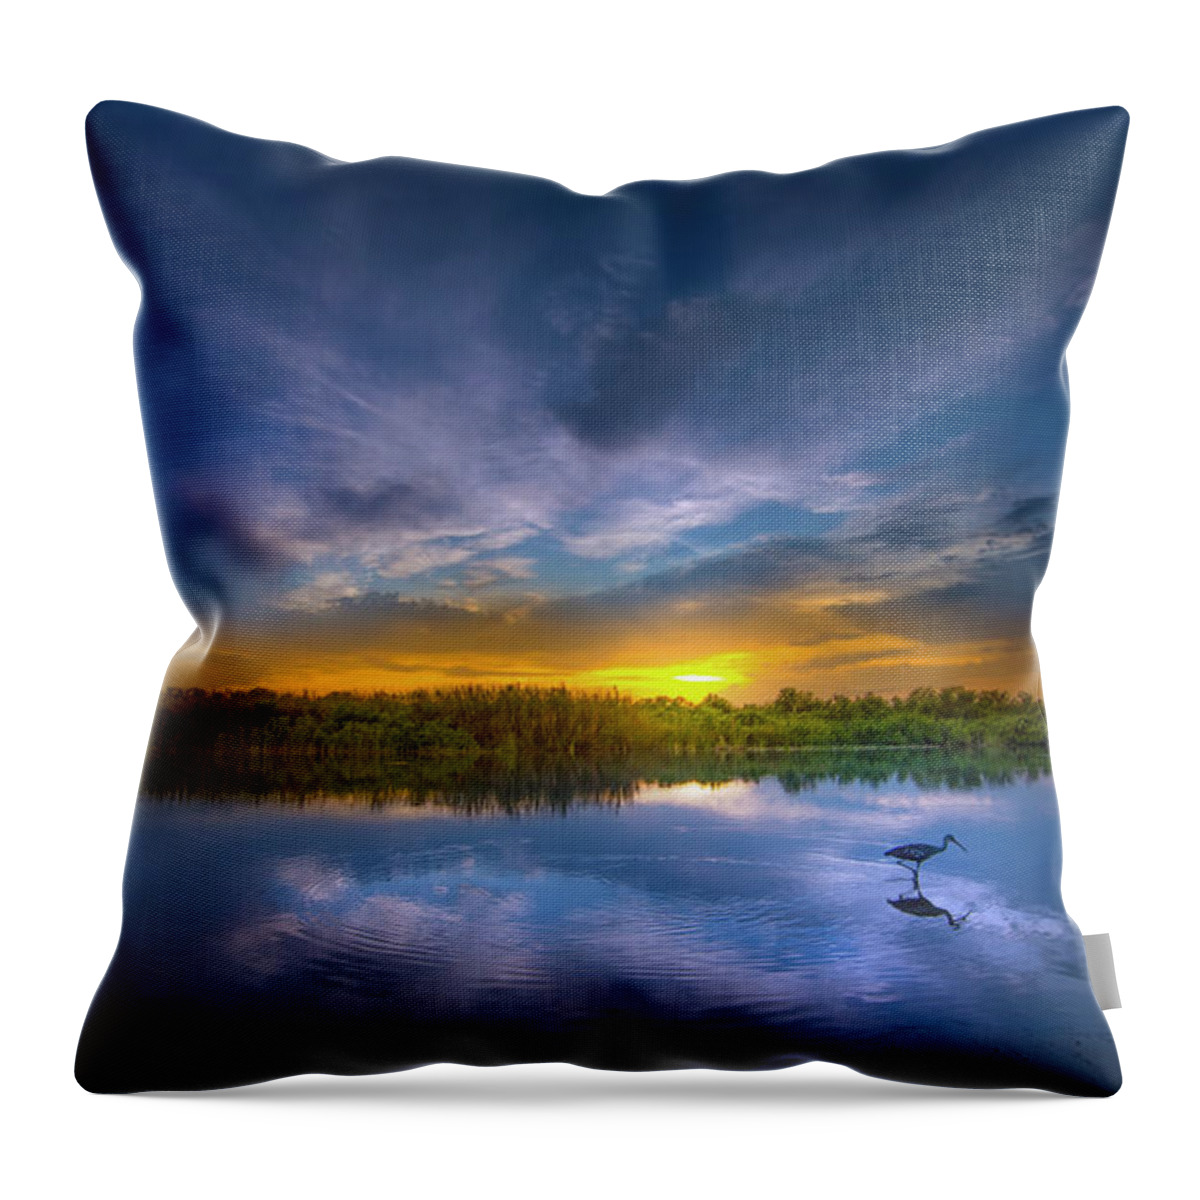 Sunset Throw Pillow featuring the photograph Limpkin Sunset by Mark Andrew Thomas